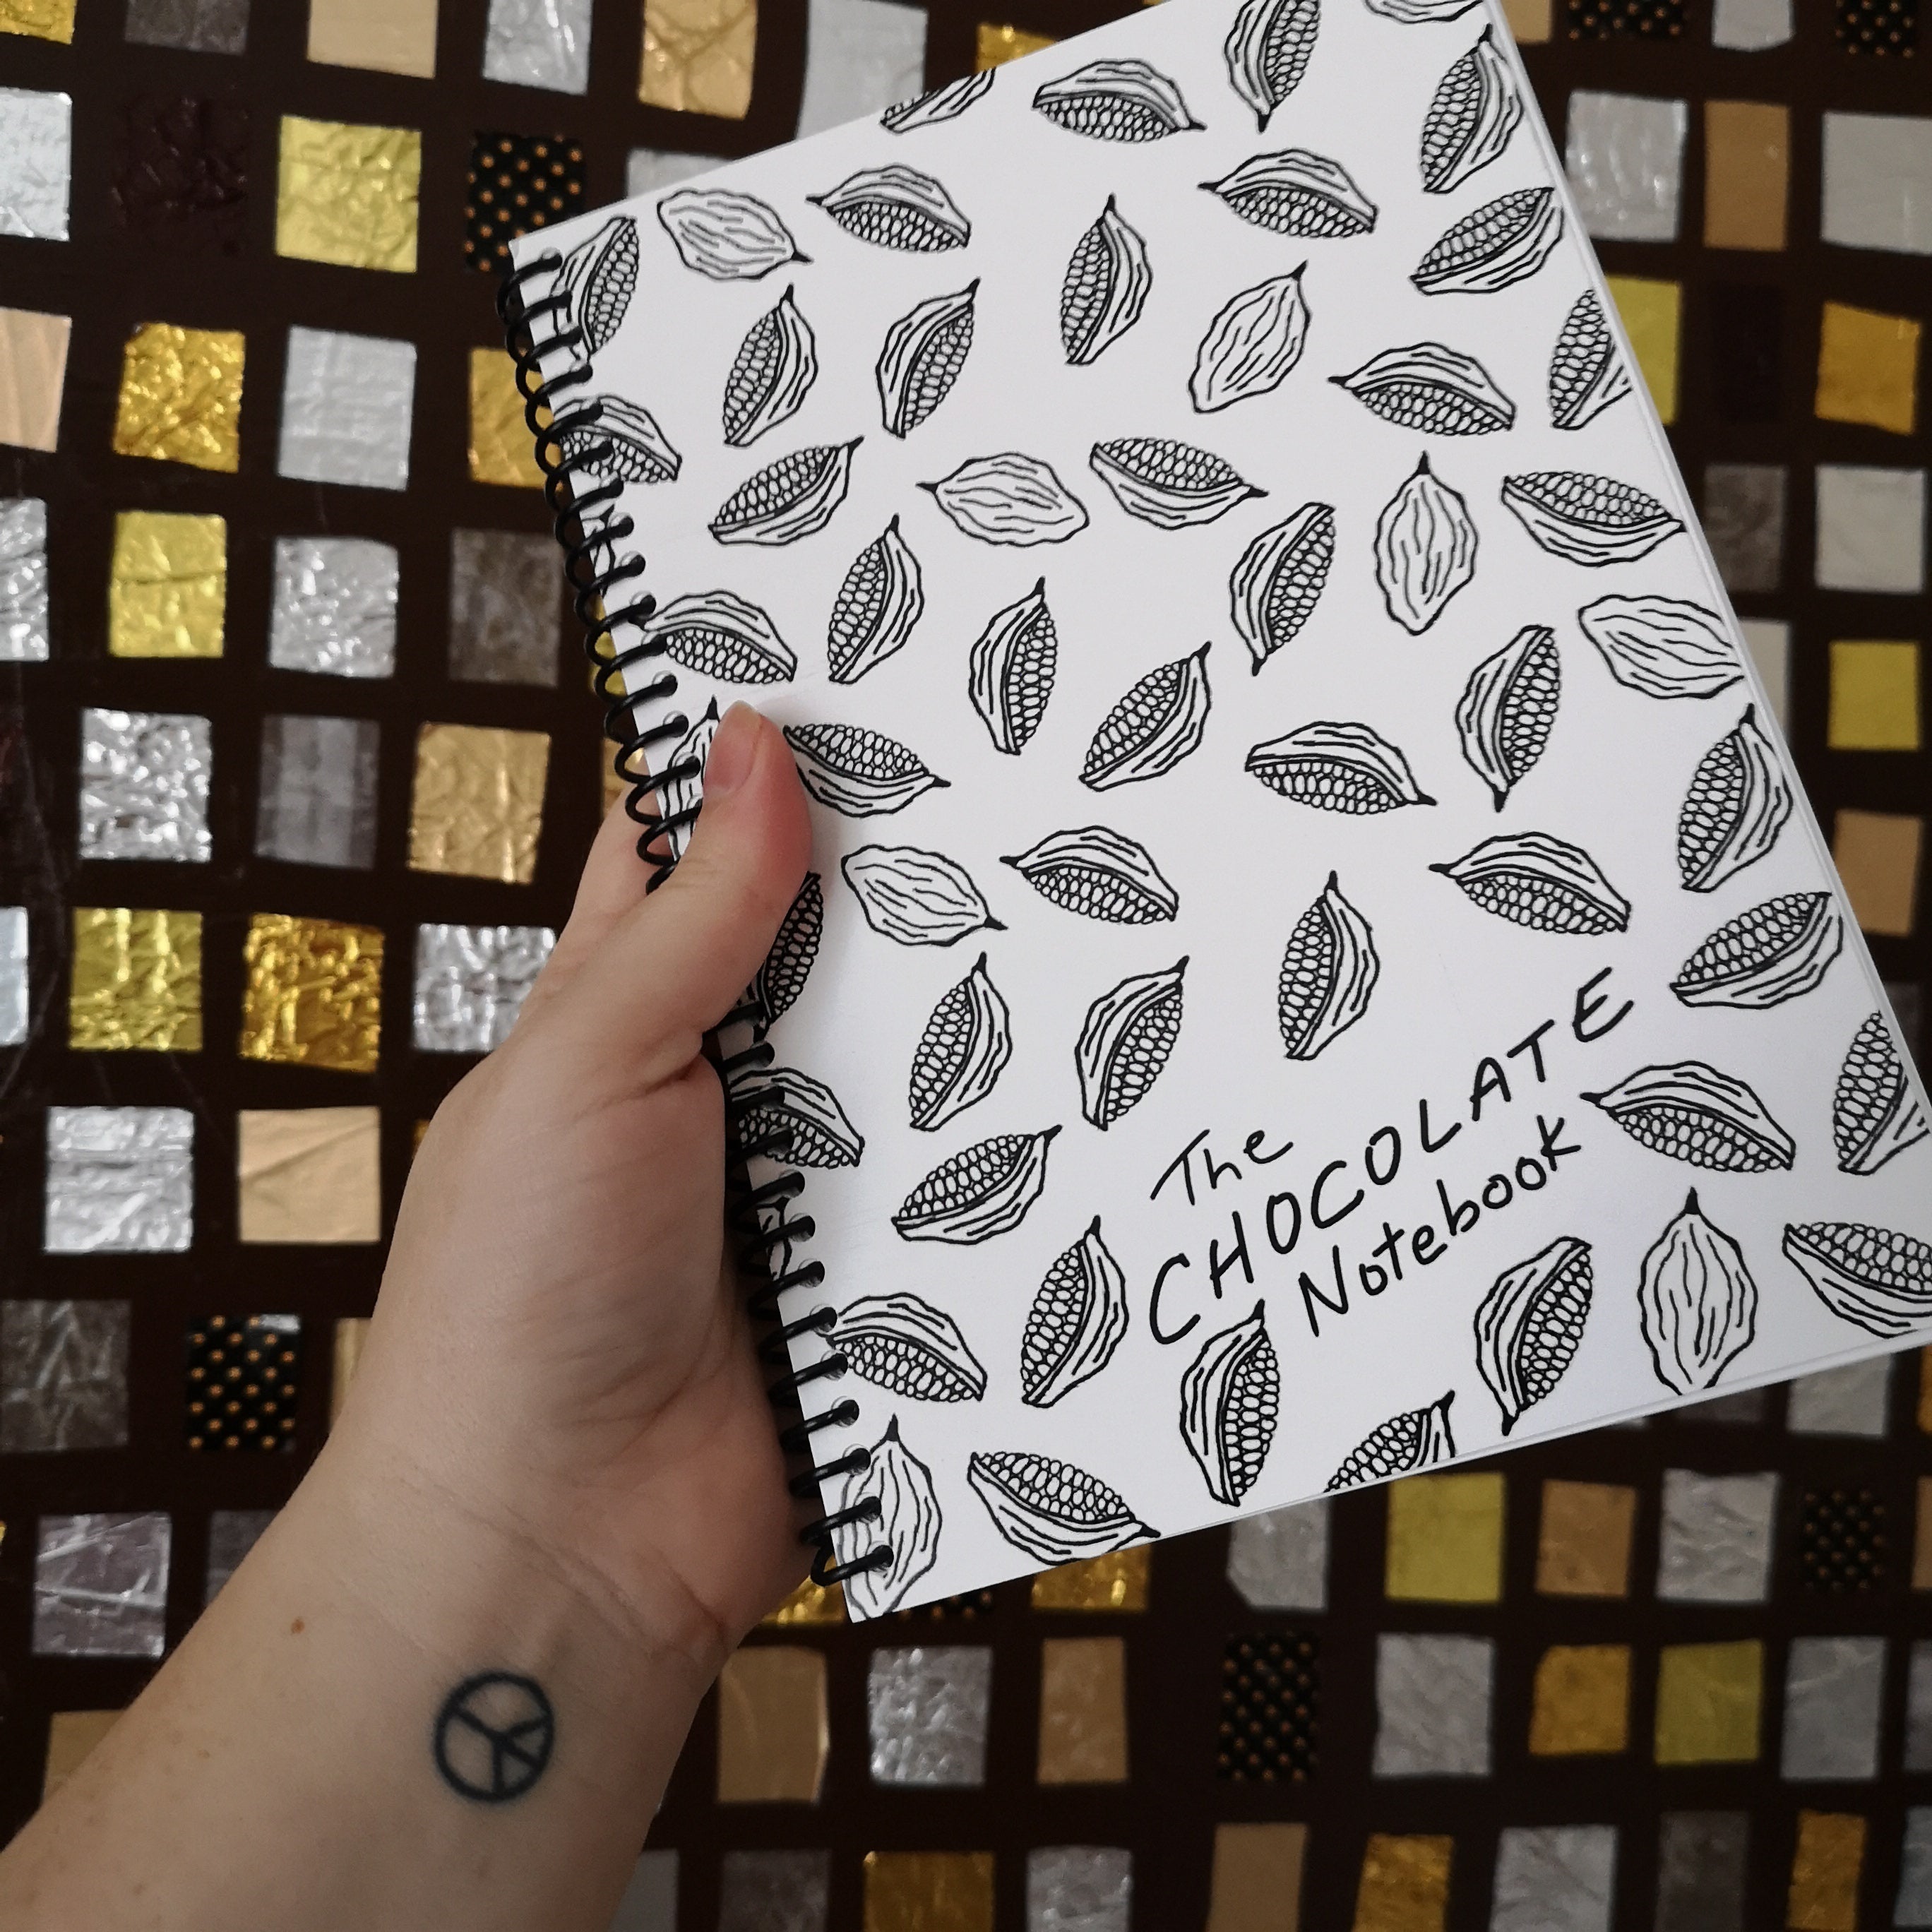 The Chocolate Notebook